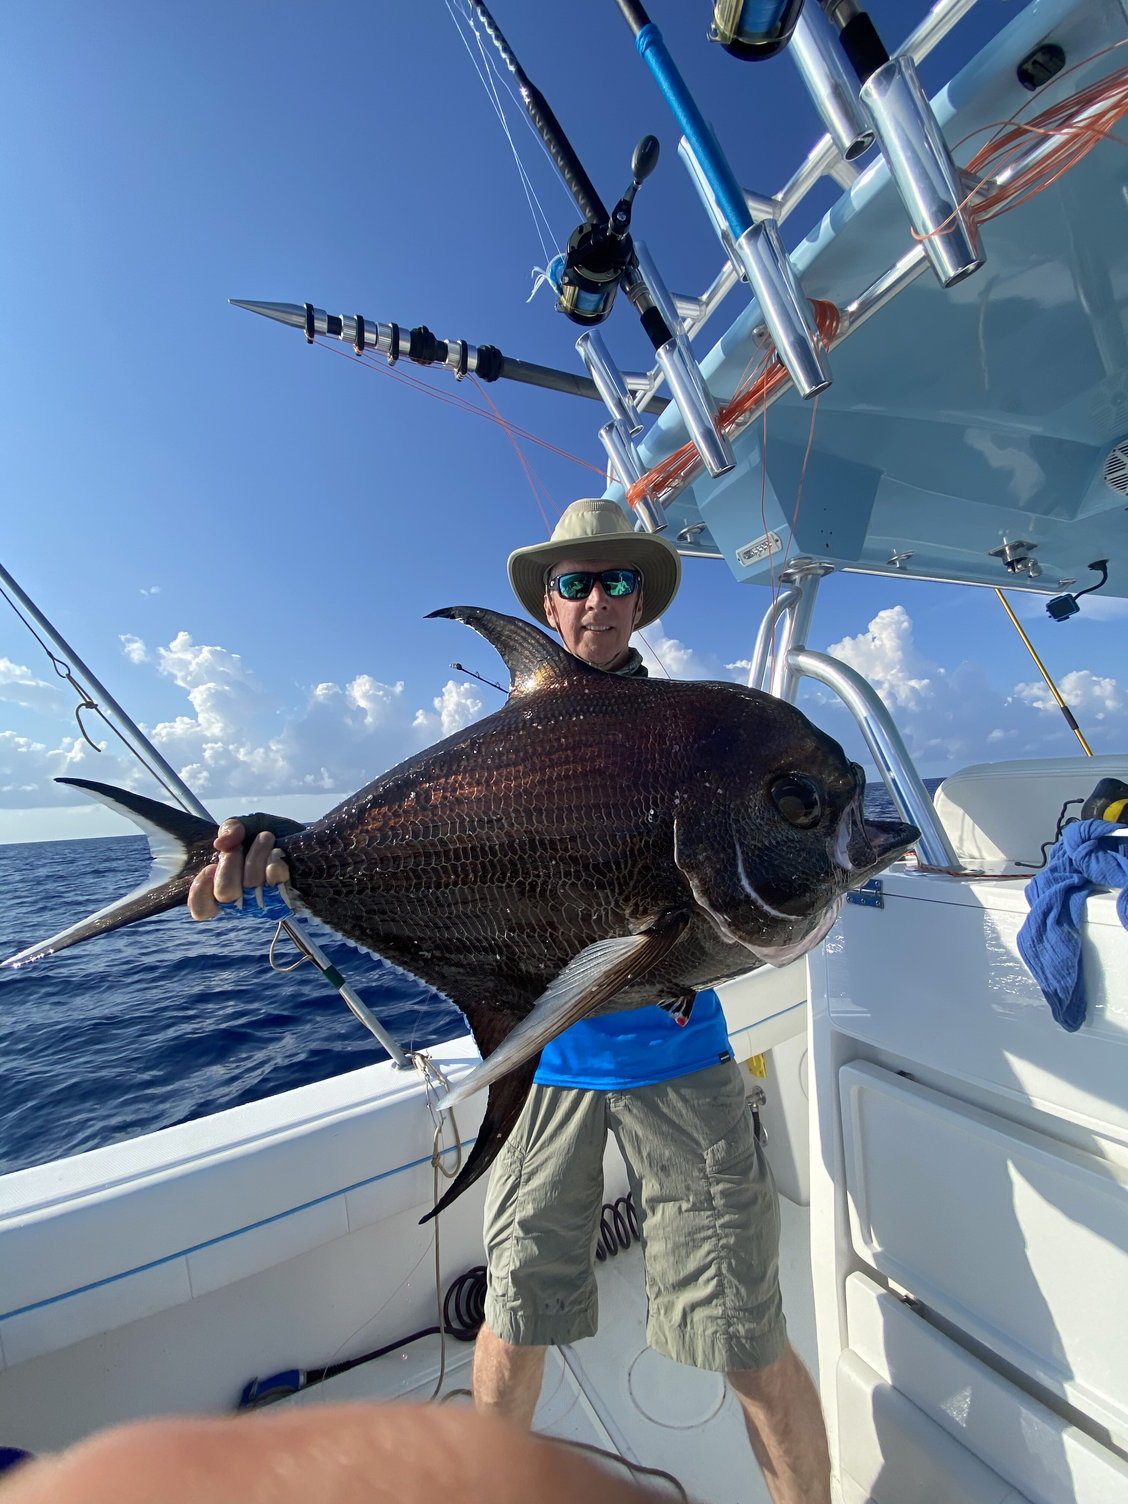 Ever tasted Pomfret? - The Hull Truth - Boating and Fishing Forum